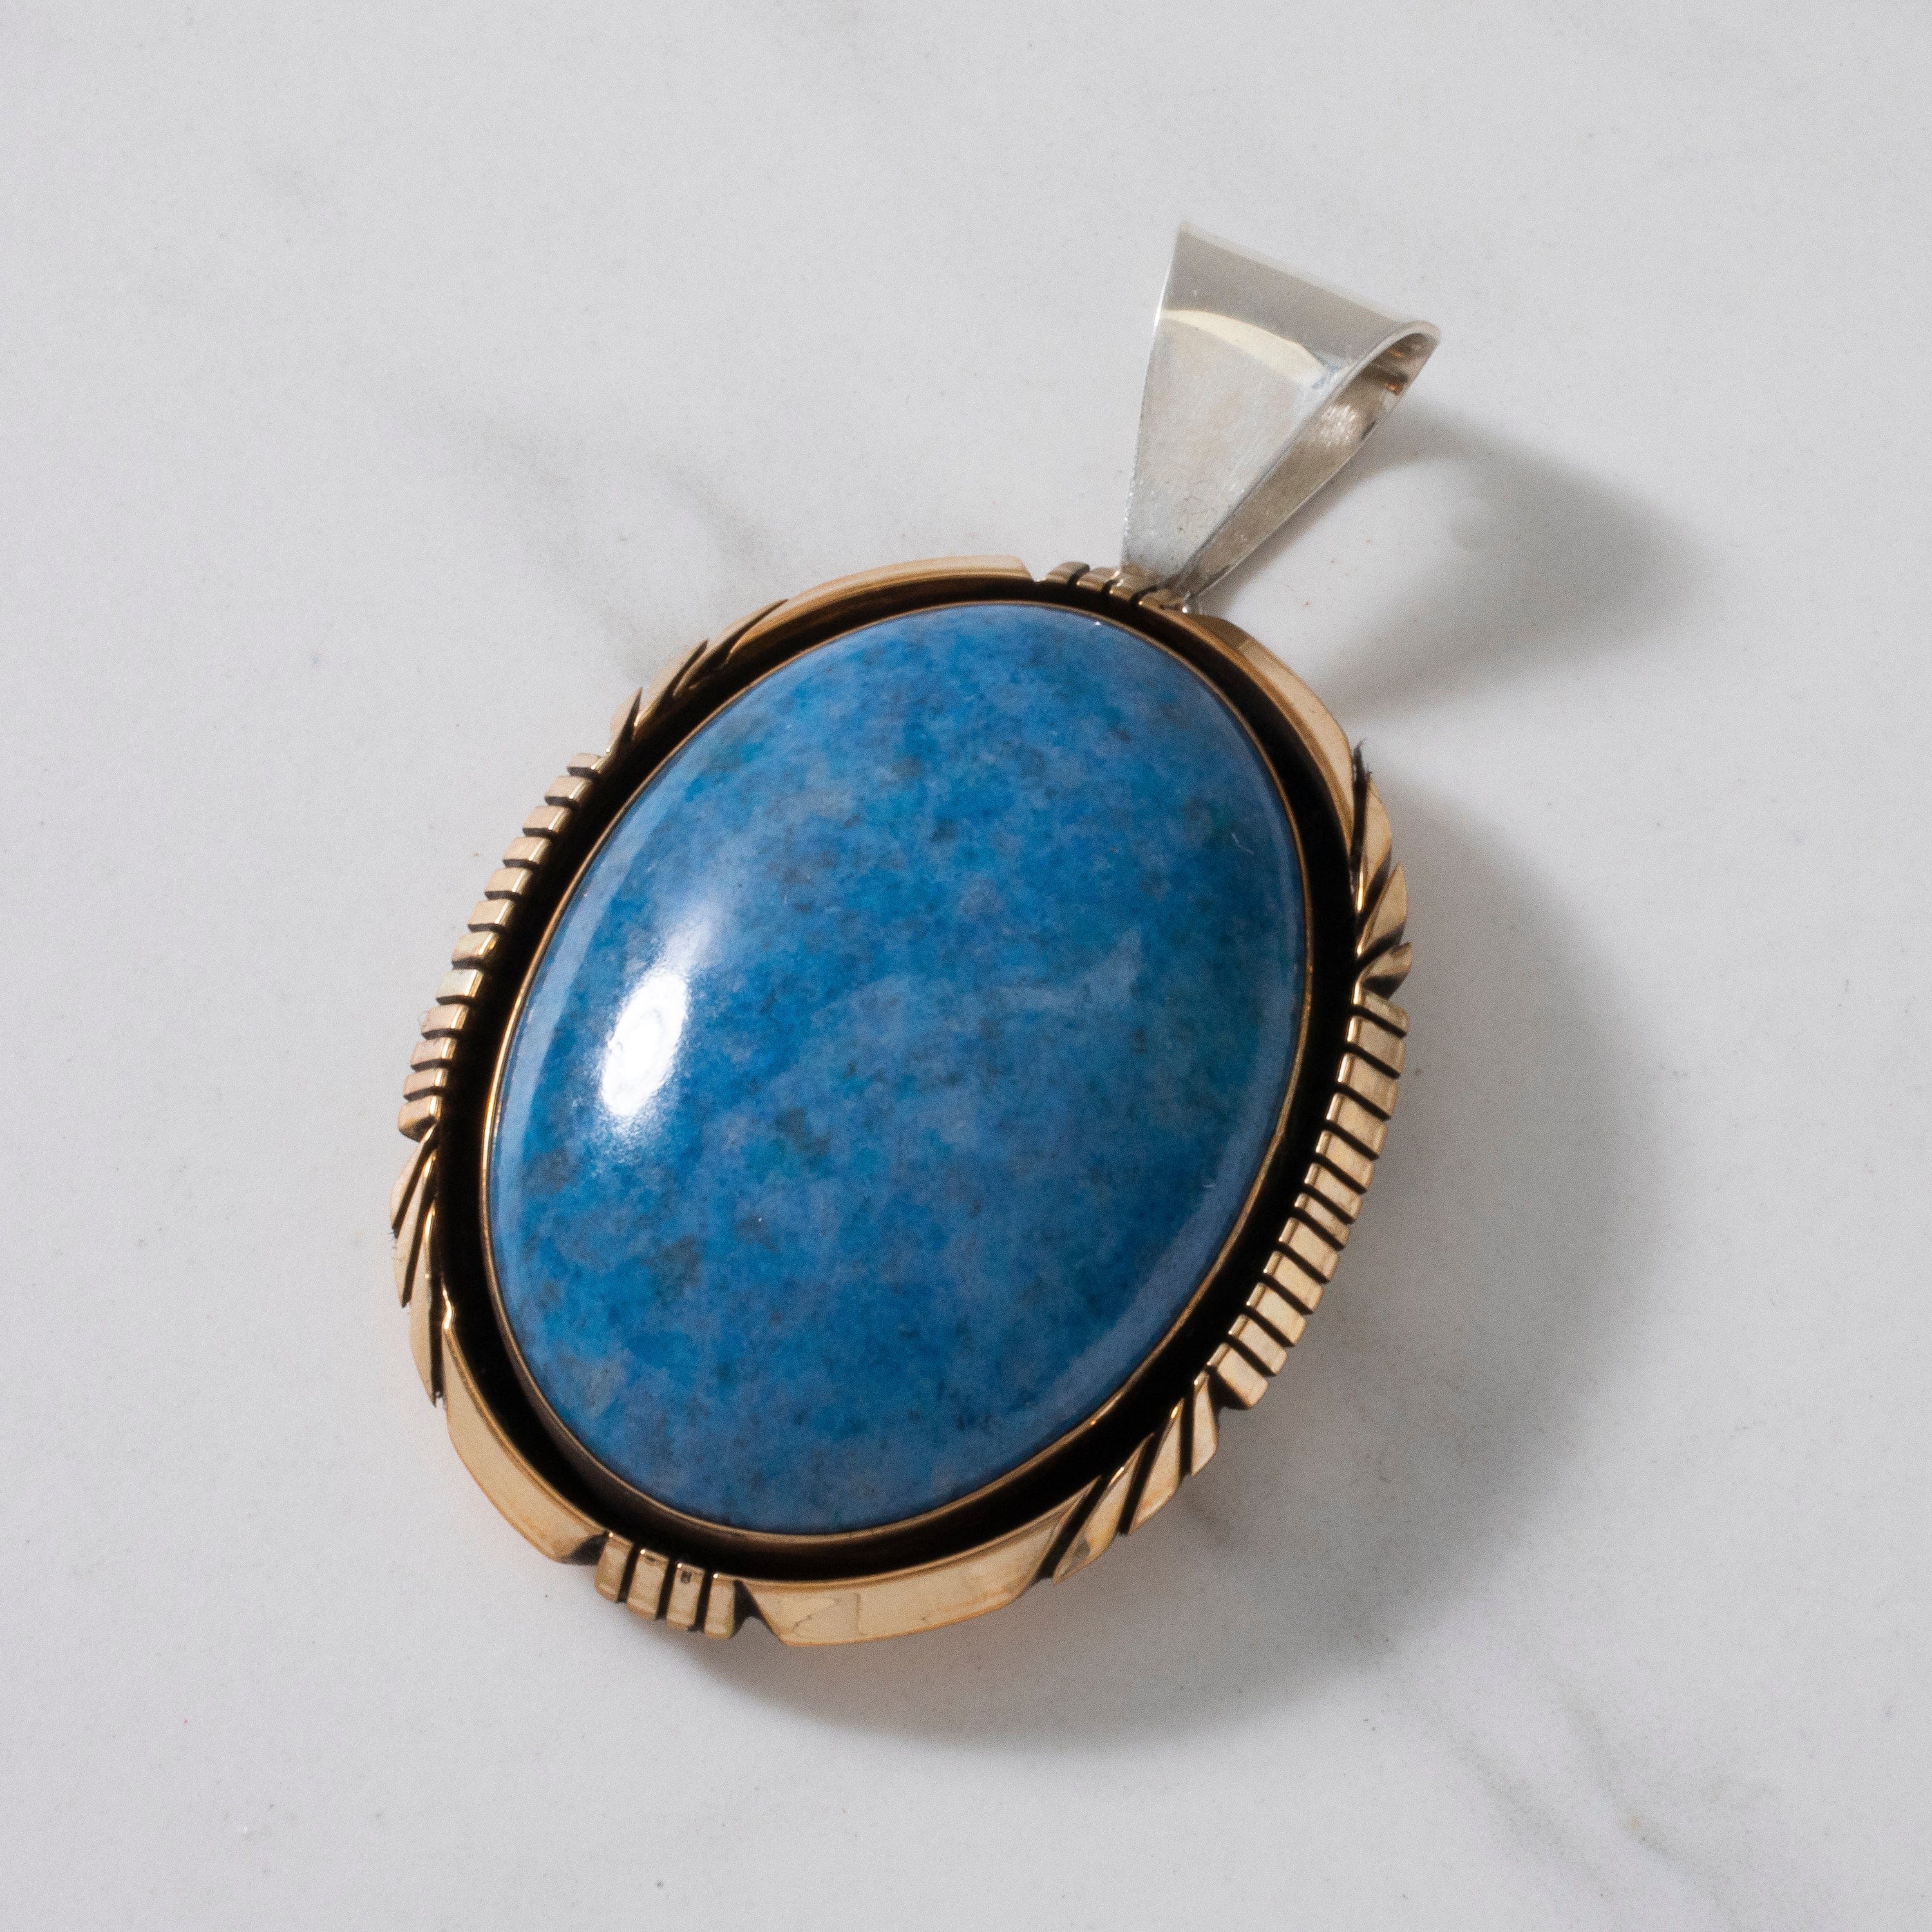 Kalifano Native American Jewelry Roy Begay Lapis Navajo USA Native American Made 925 Sterling Silver & 12K Gold Filled Pendant NAN1300.015